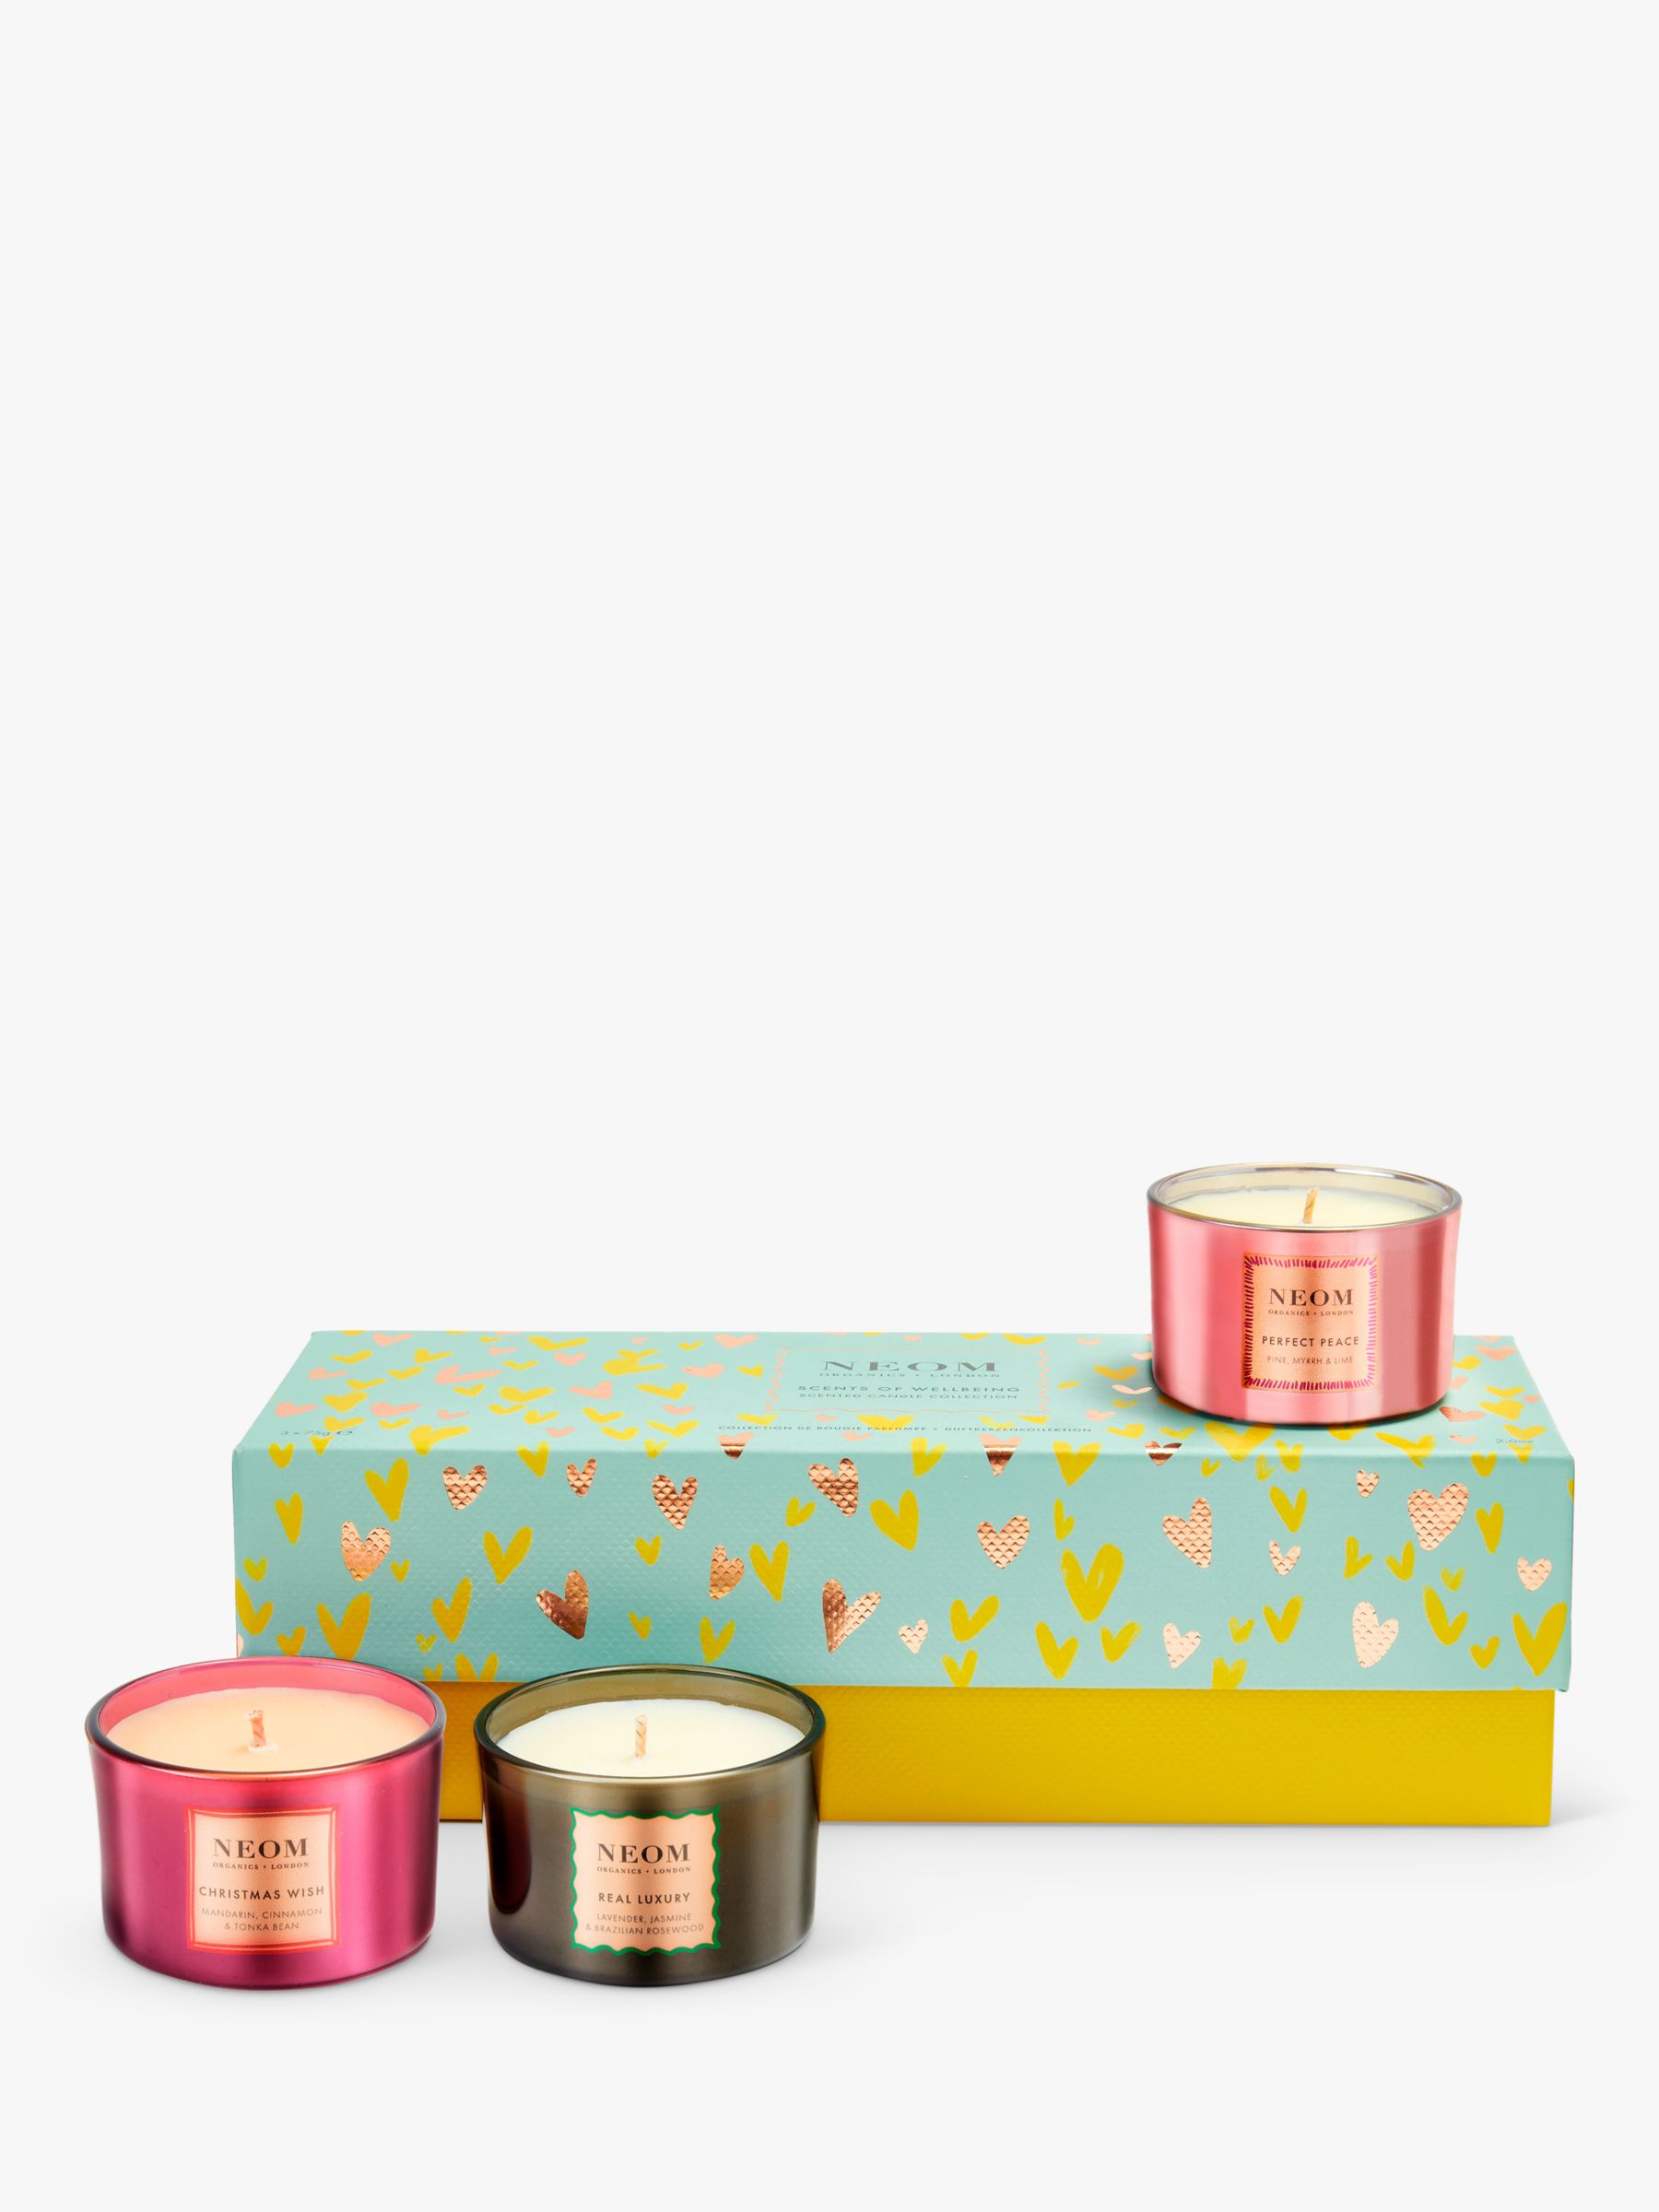 Neom Organics Scents of Wellbeing Scented Candle Gift Set